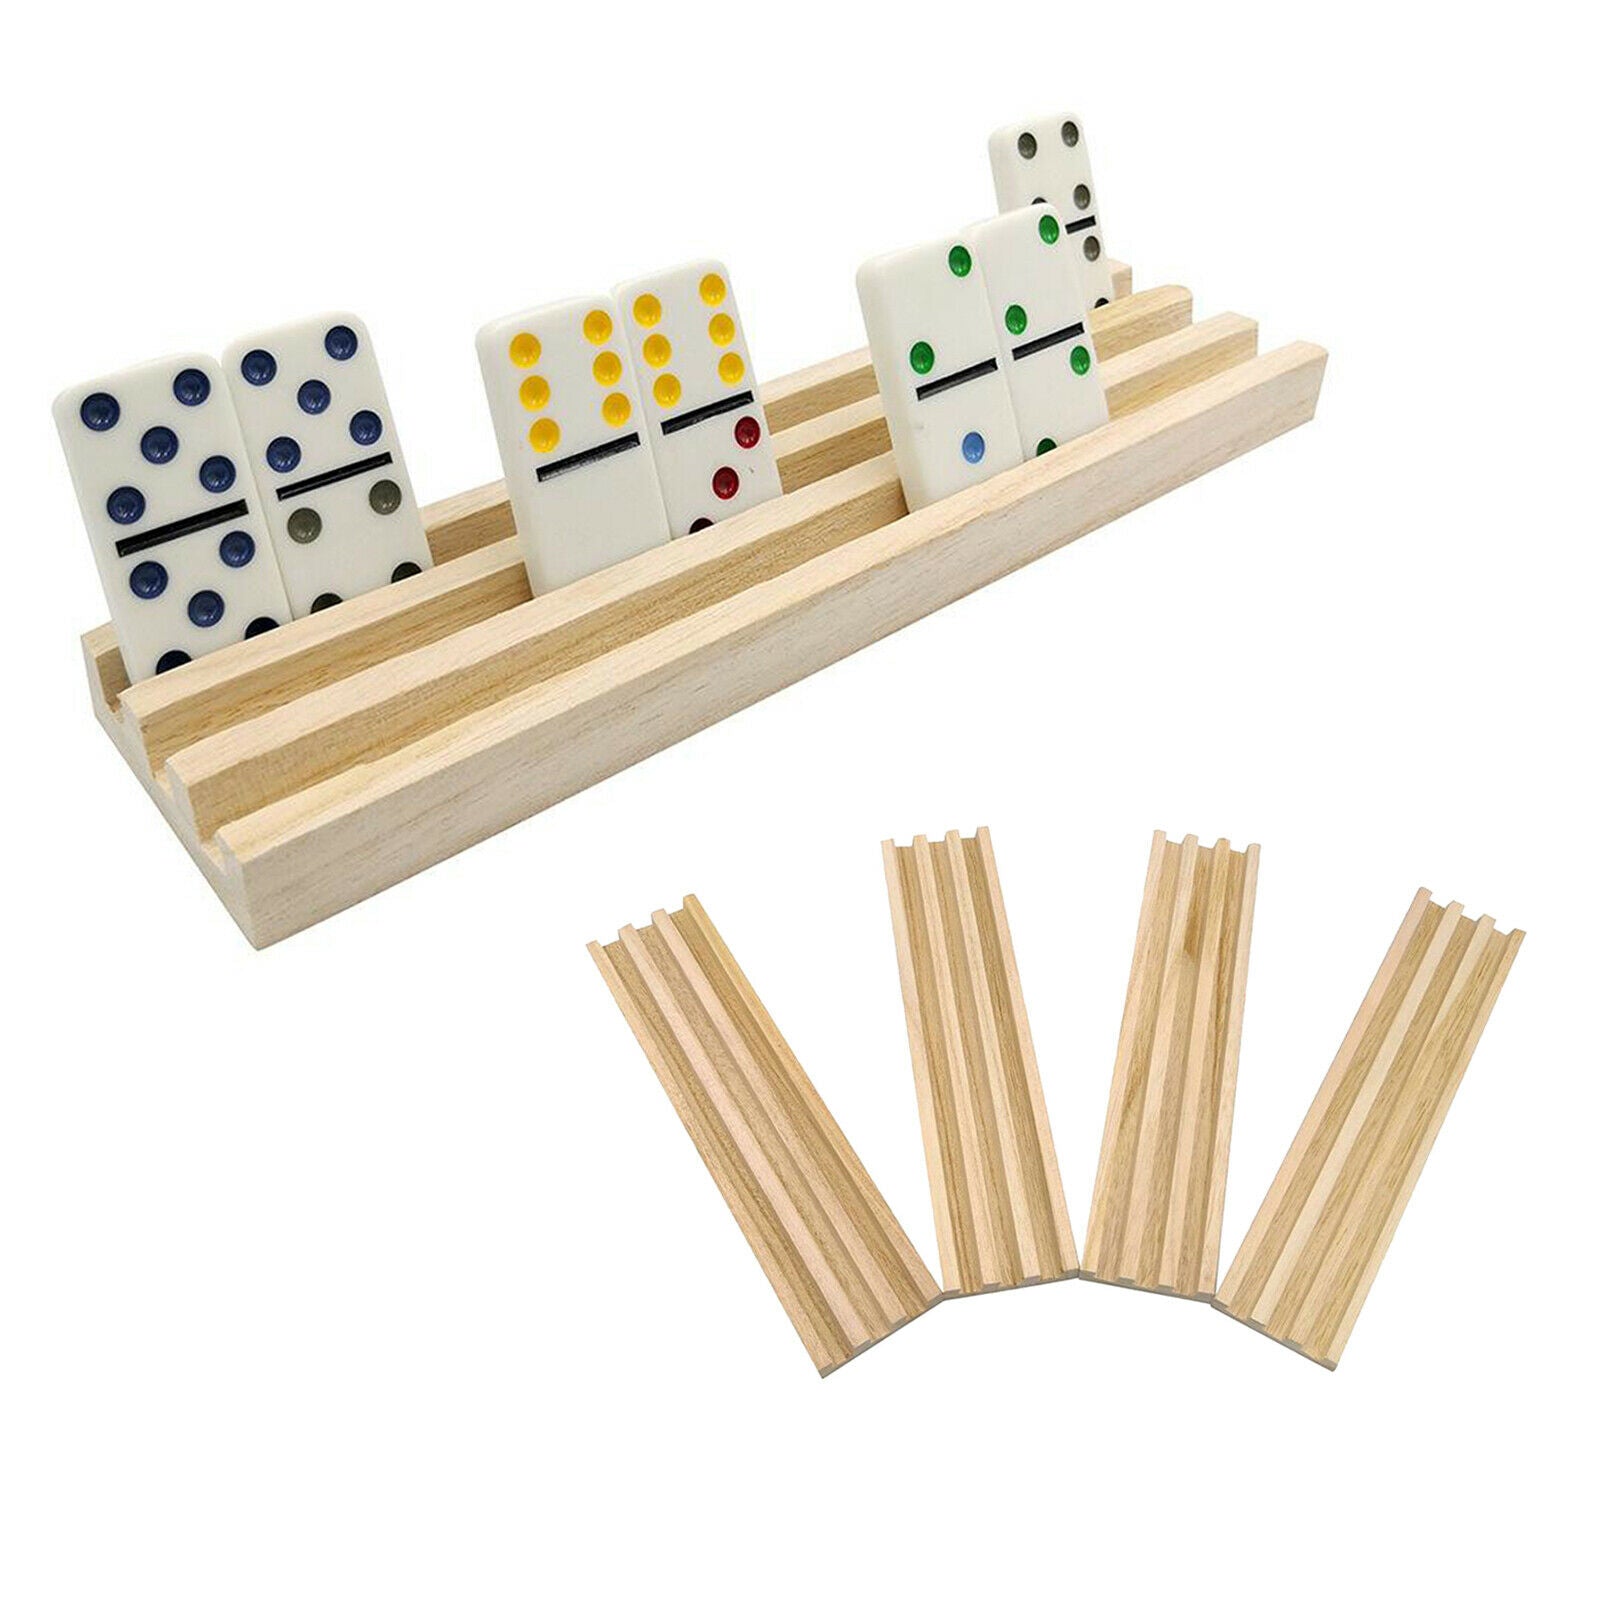 4pcs / set Wooden Domino Tile Trays Organizer for Mexican Train Chicken